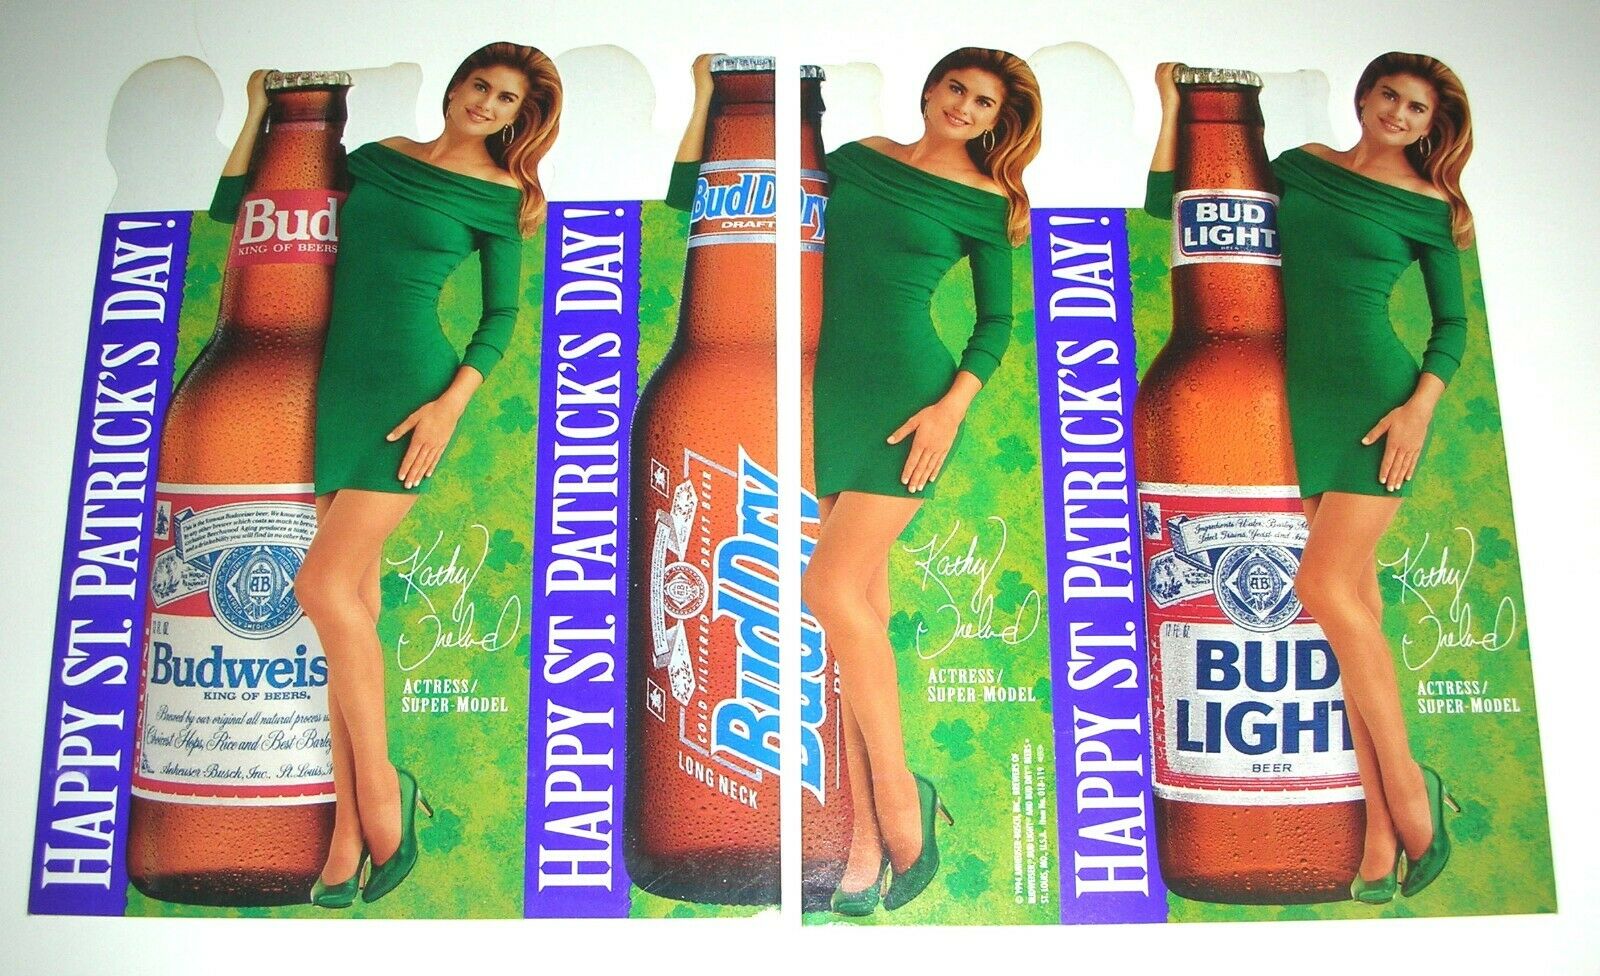 Kathy Ireland St. Pat's Day Bud Light Advertising Table Top Tent Standee M- 1994